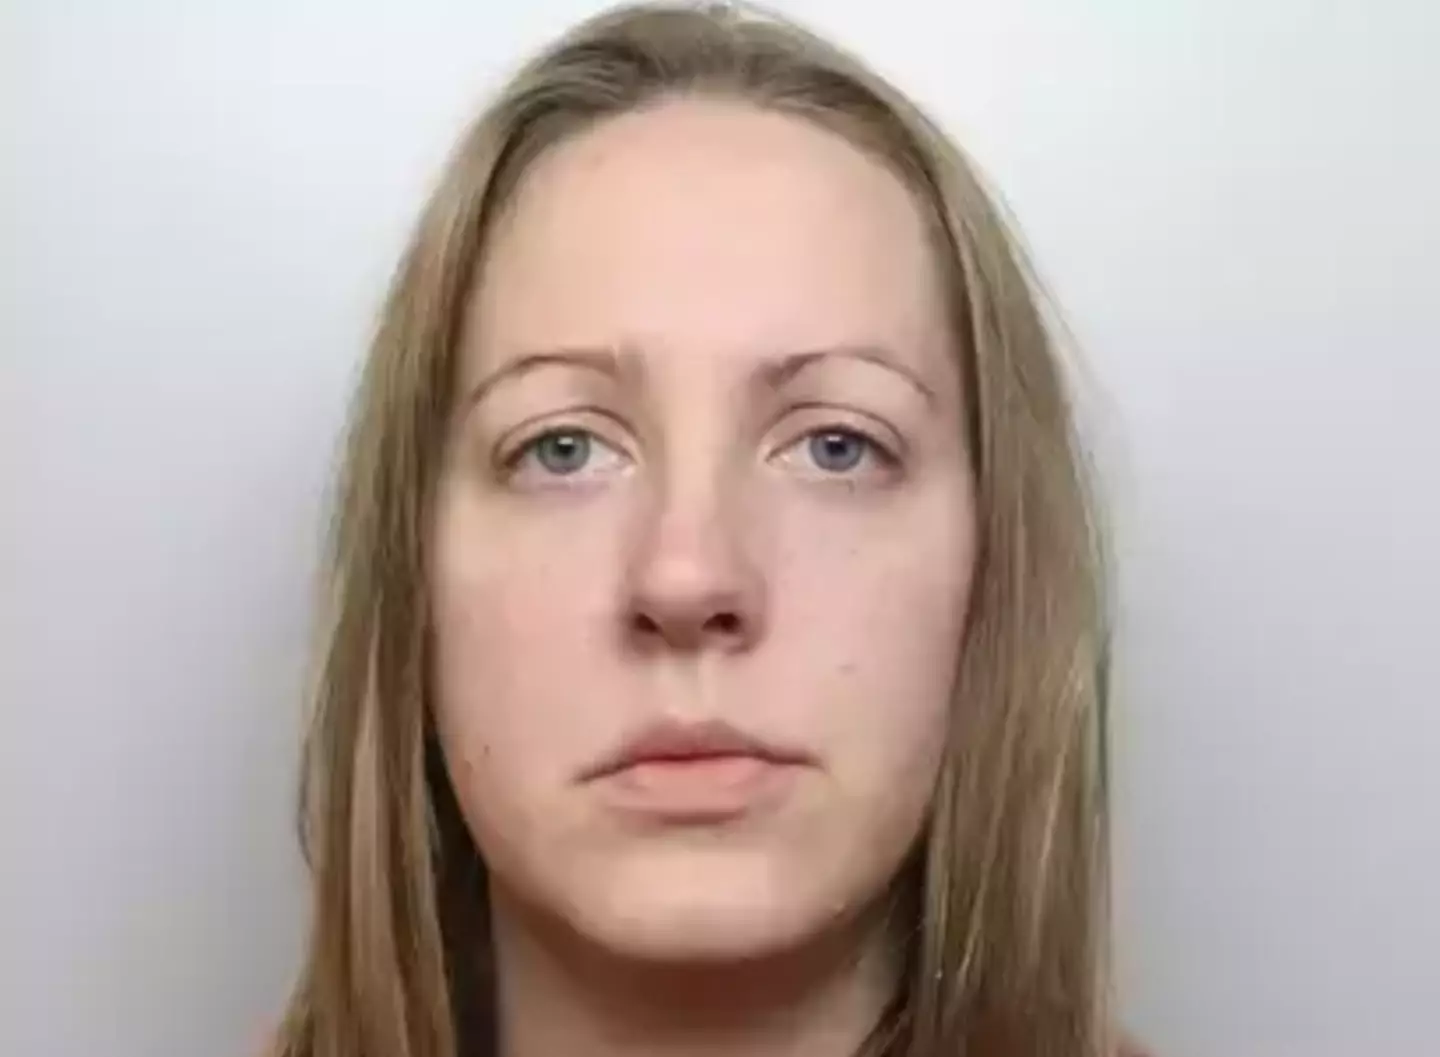 Lucy Letby was arrested at her home in 2018.